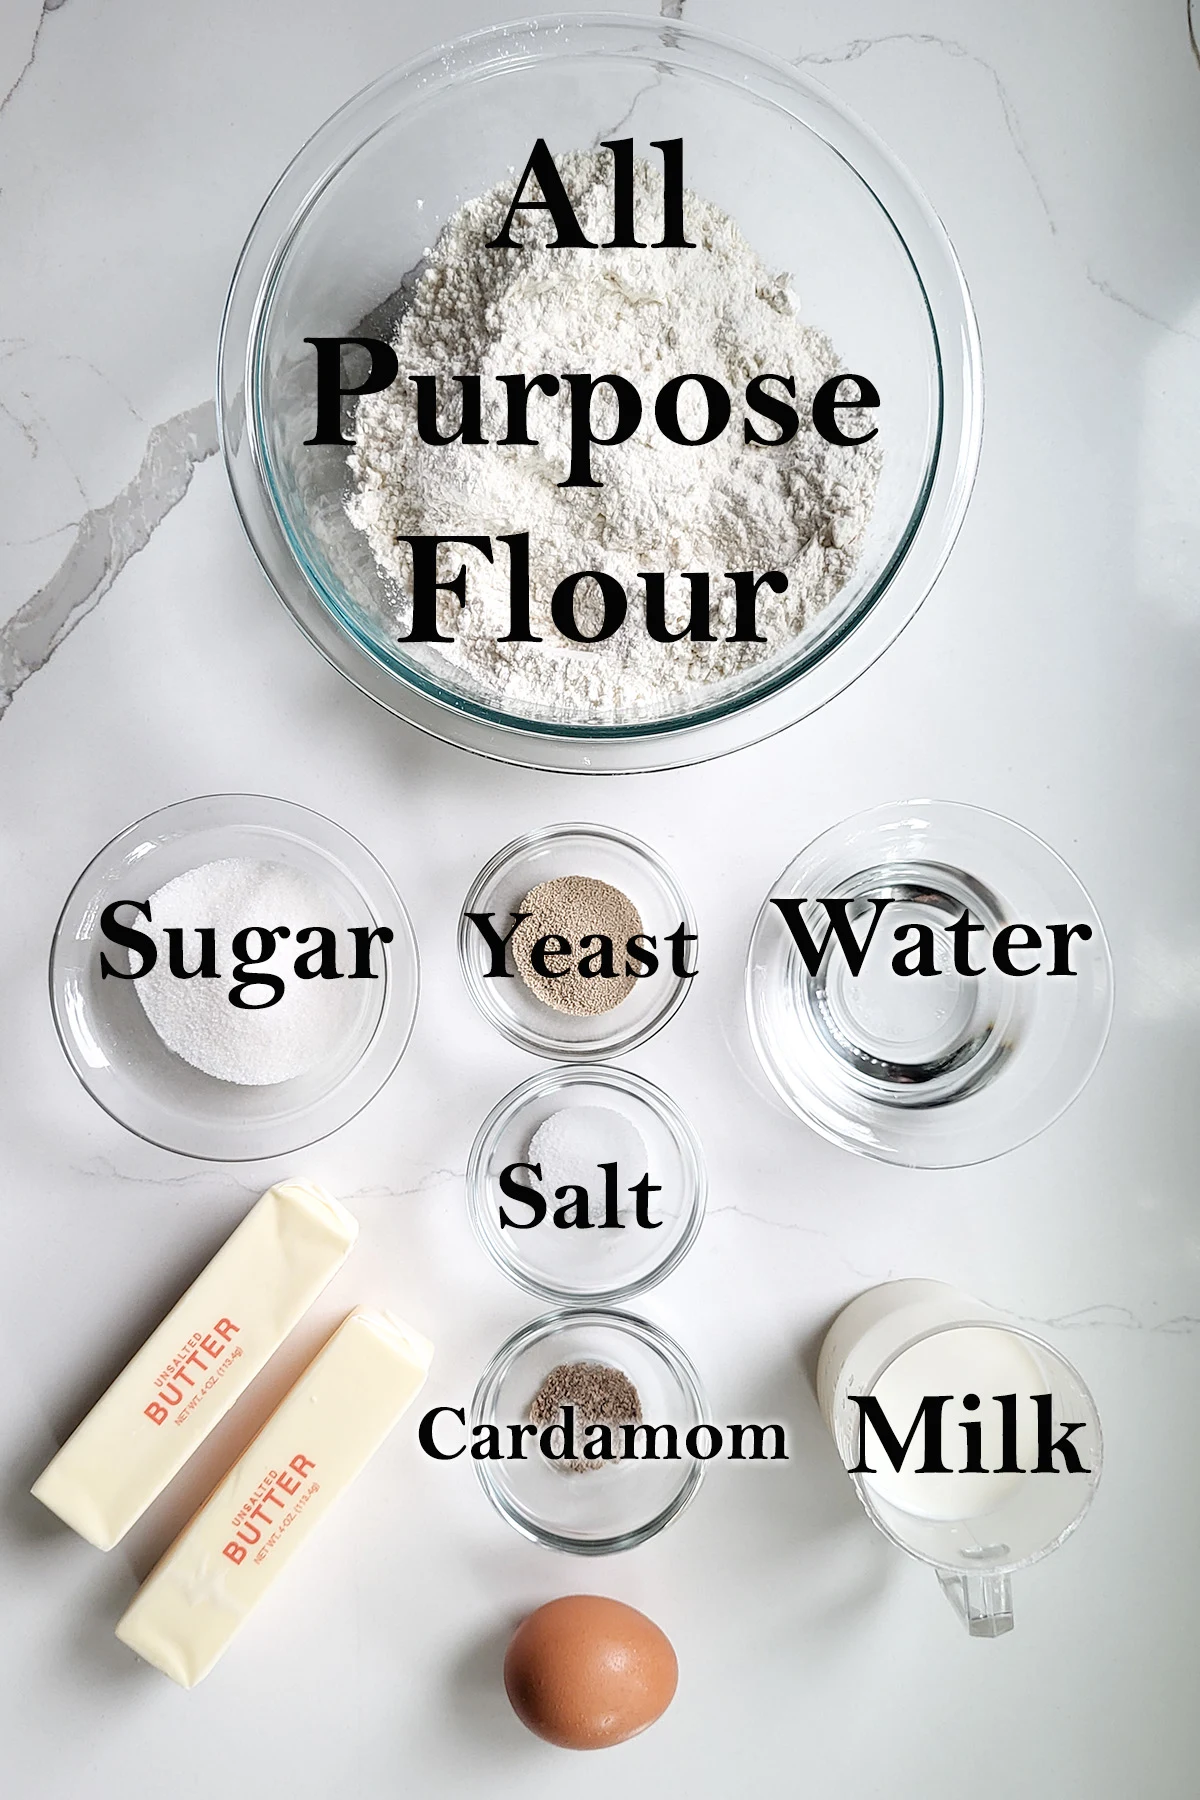 ingredients for danish dough in glass bowls on a white surface.